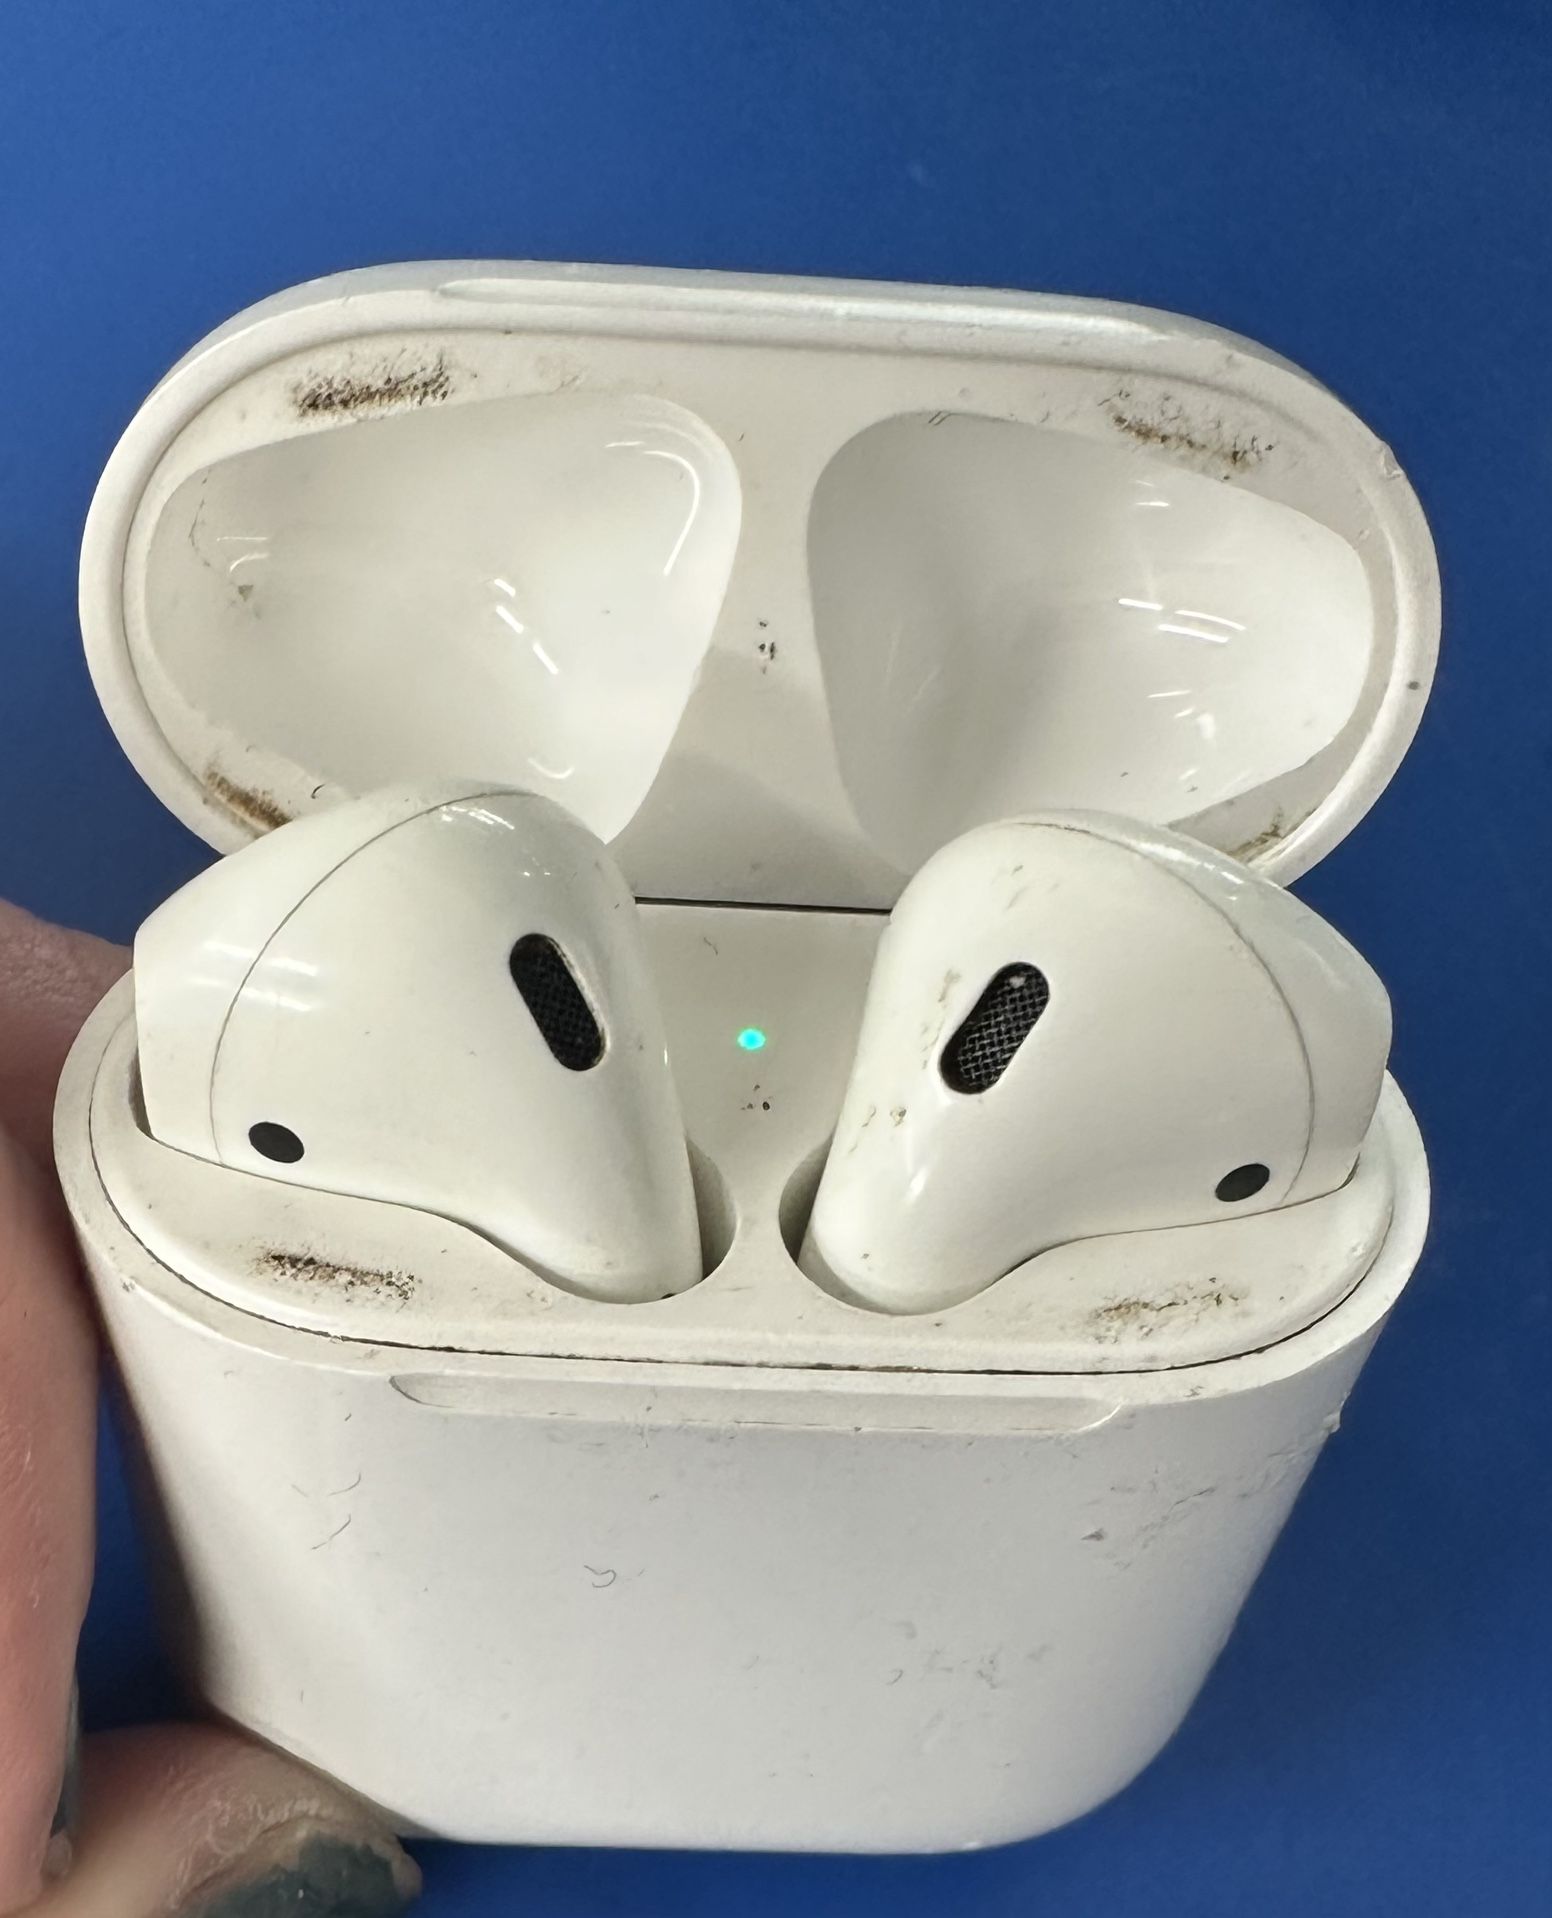 Apple AirPods 1st Generation 